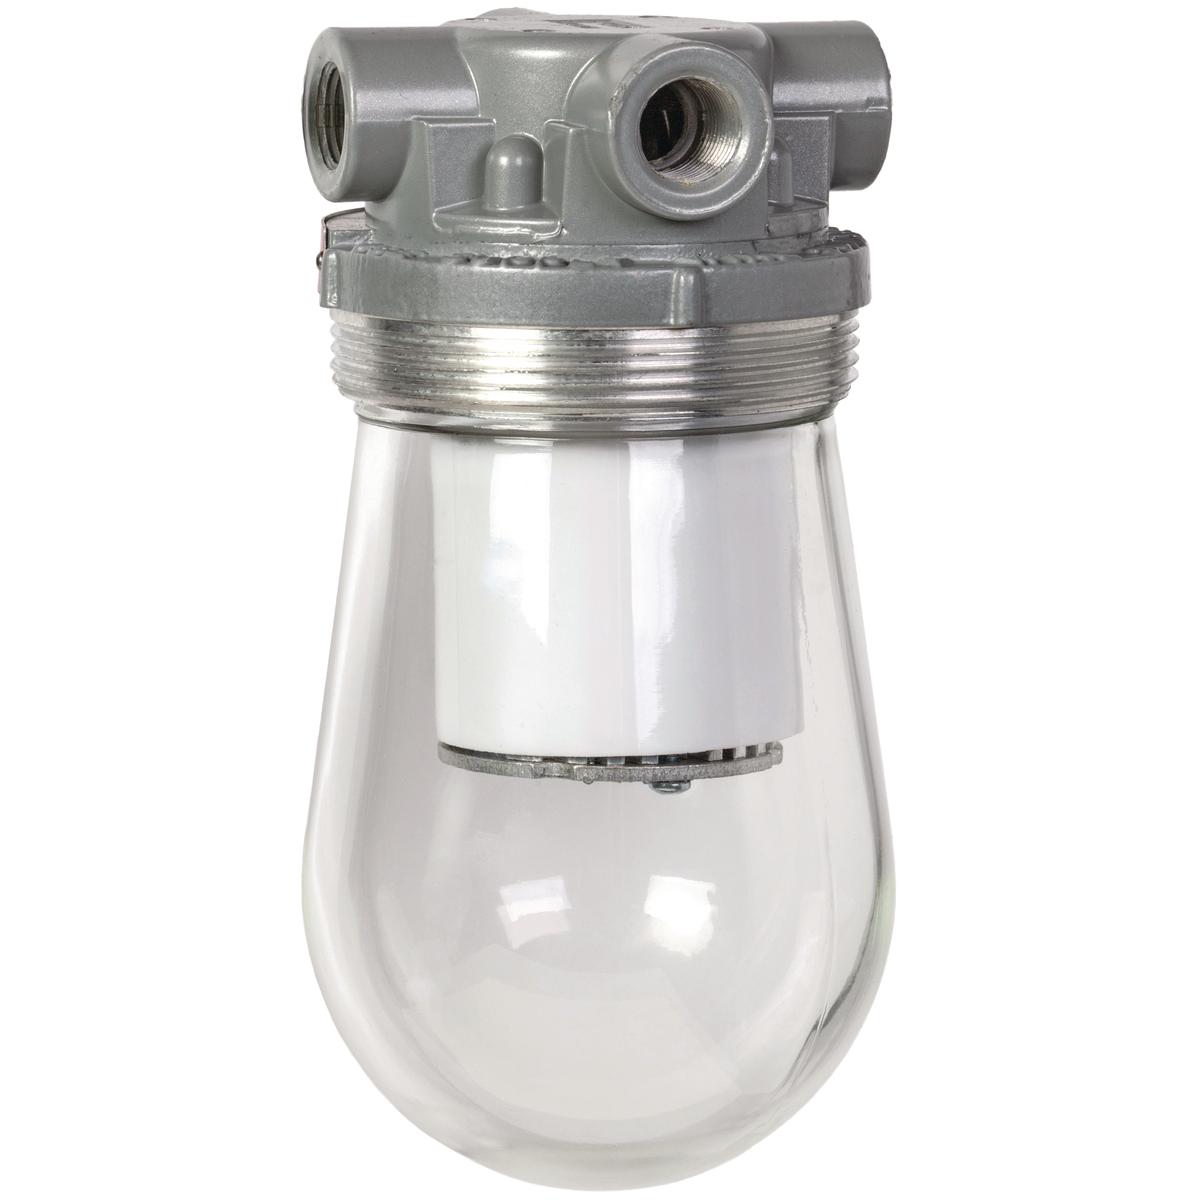 Hubbell DVL1330X2G The DVL Series is a Dust Tight/ Utility fixture using energy efficient LED's. This fixture is made with a cast copper-free aluminum housing and mount that is  suitable for harsh and hazardous environments. With the design of this fixtures internal heat si